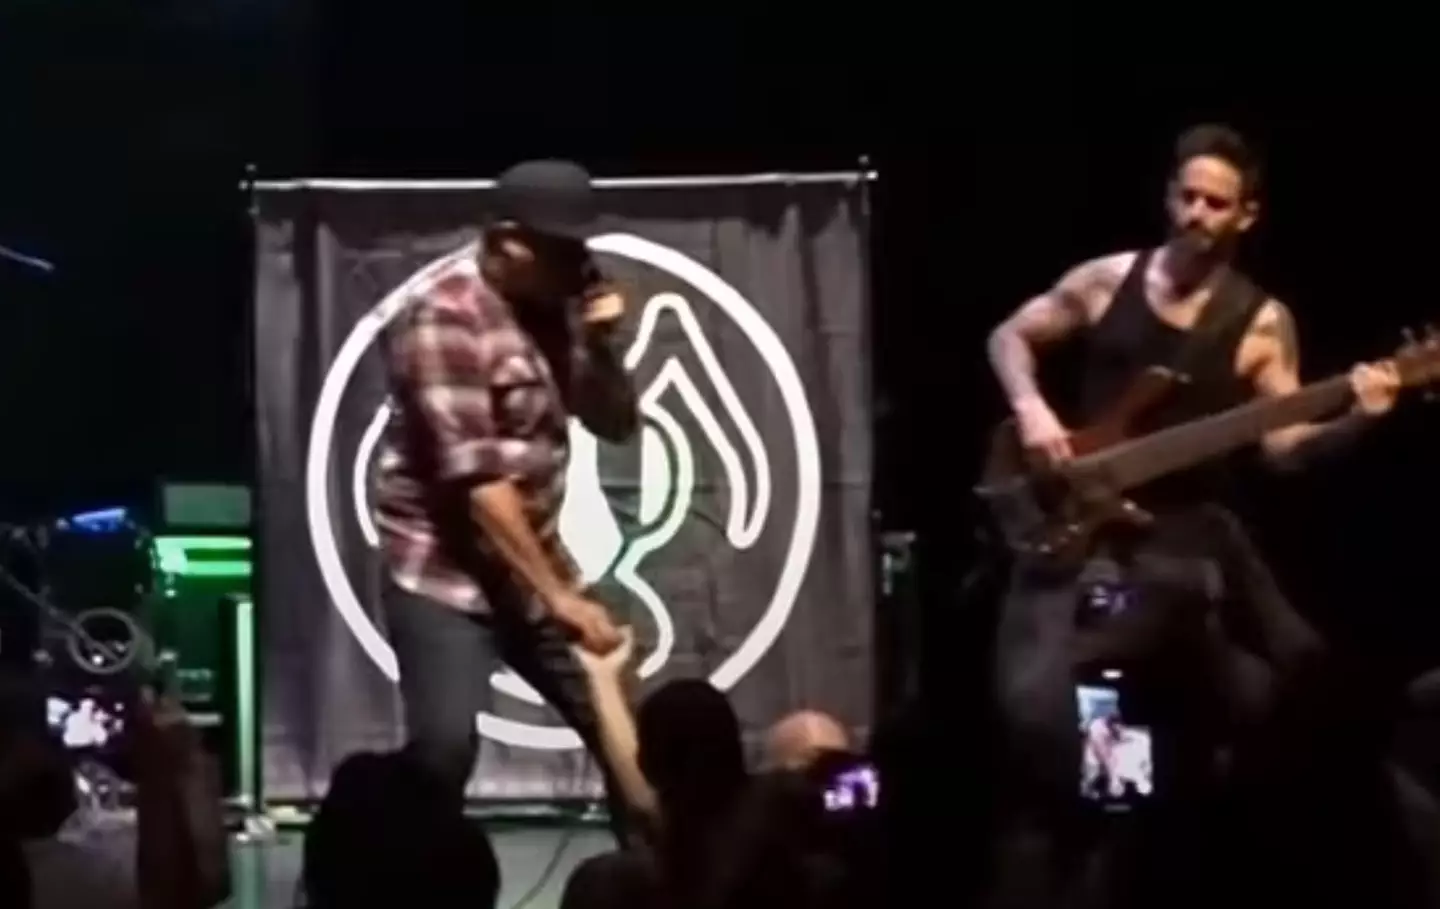 The singer allegedly tried to force a fan's hand onto his crotch.